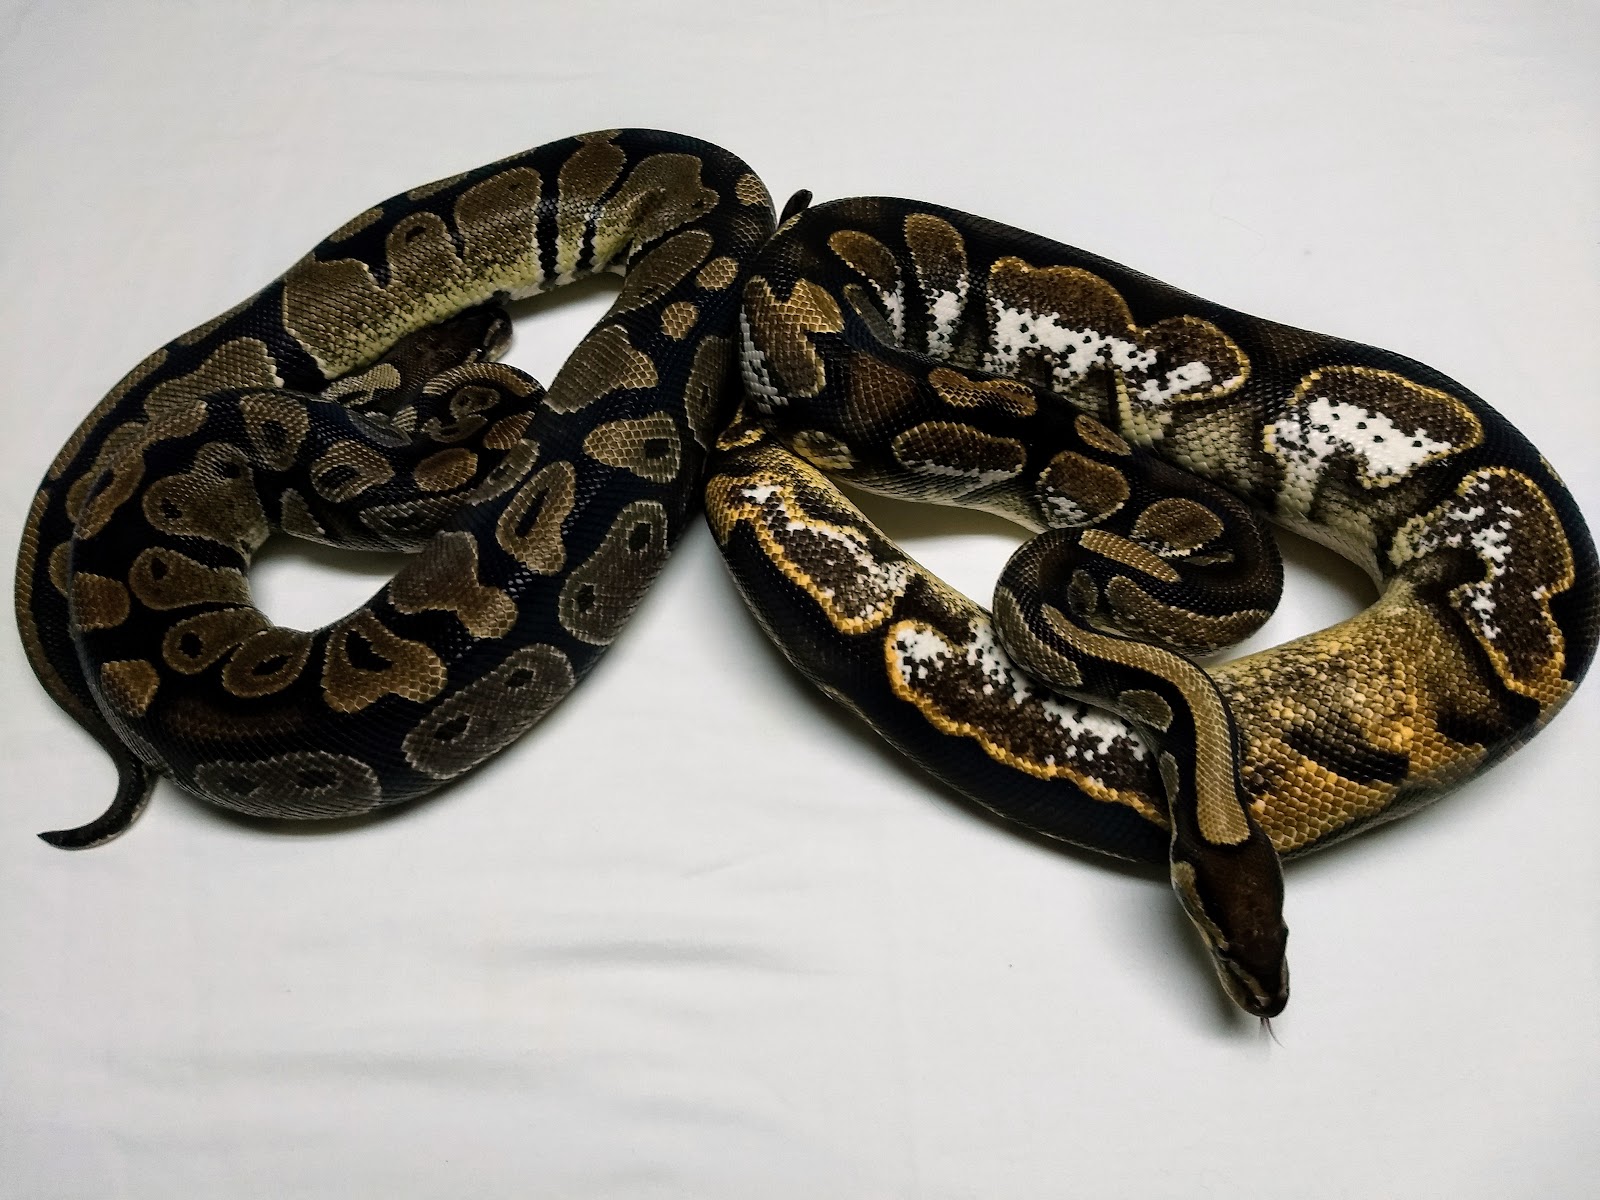 (Left) Normal (right) Calico By Alpine Reptiles